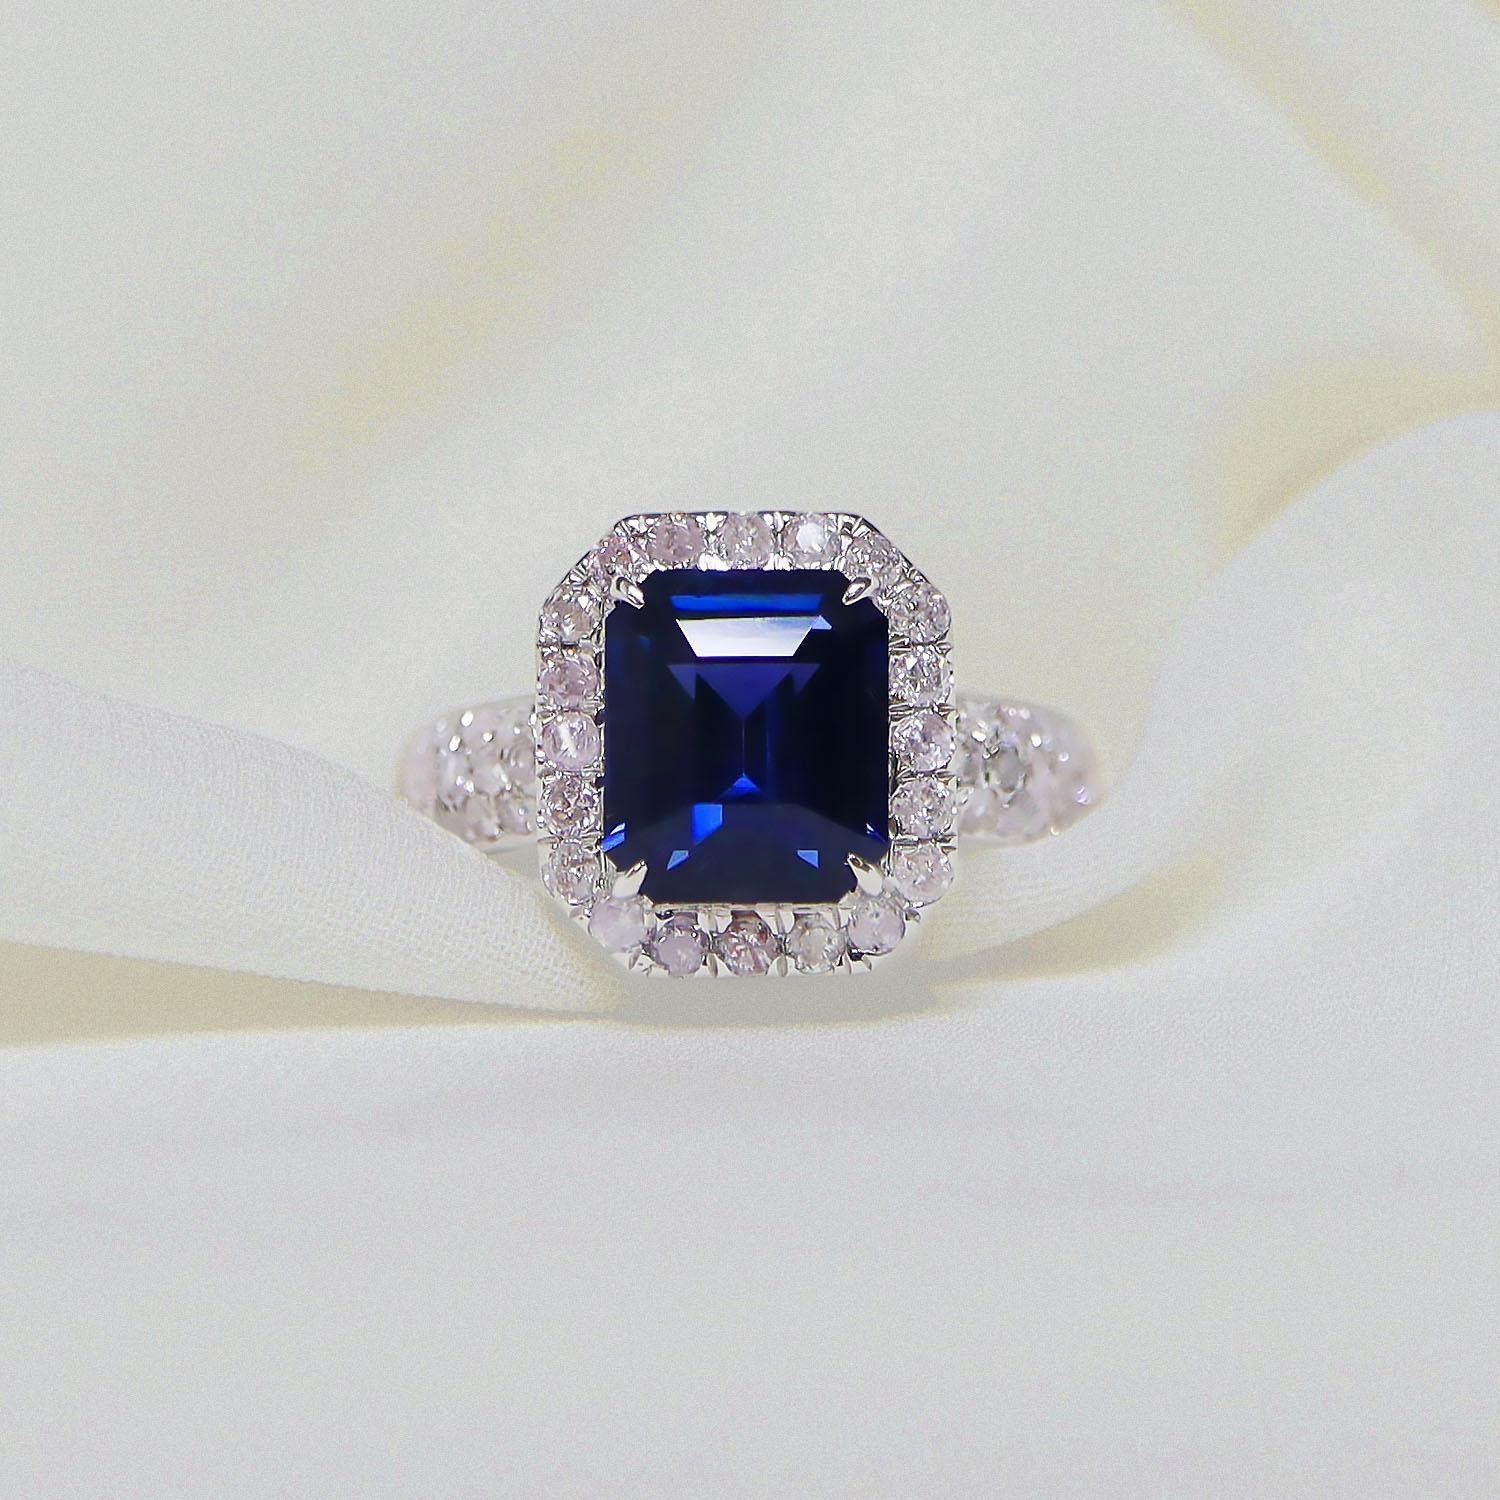 *IGI 14K 2.90 Ct Color Change Blue Spinel&Pink Diamonds Antique Engagement Ring*

IGI-certified natural untreated blue spinel weighing 2.90 ct set on 14K white gold luxury table pave' design band with natural pink diamonds weighing 0.69 ct.  

The